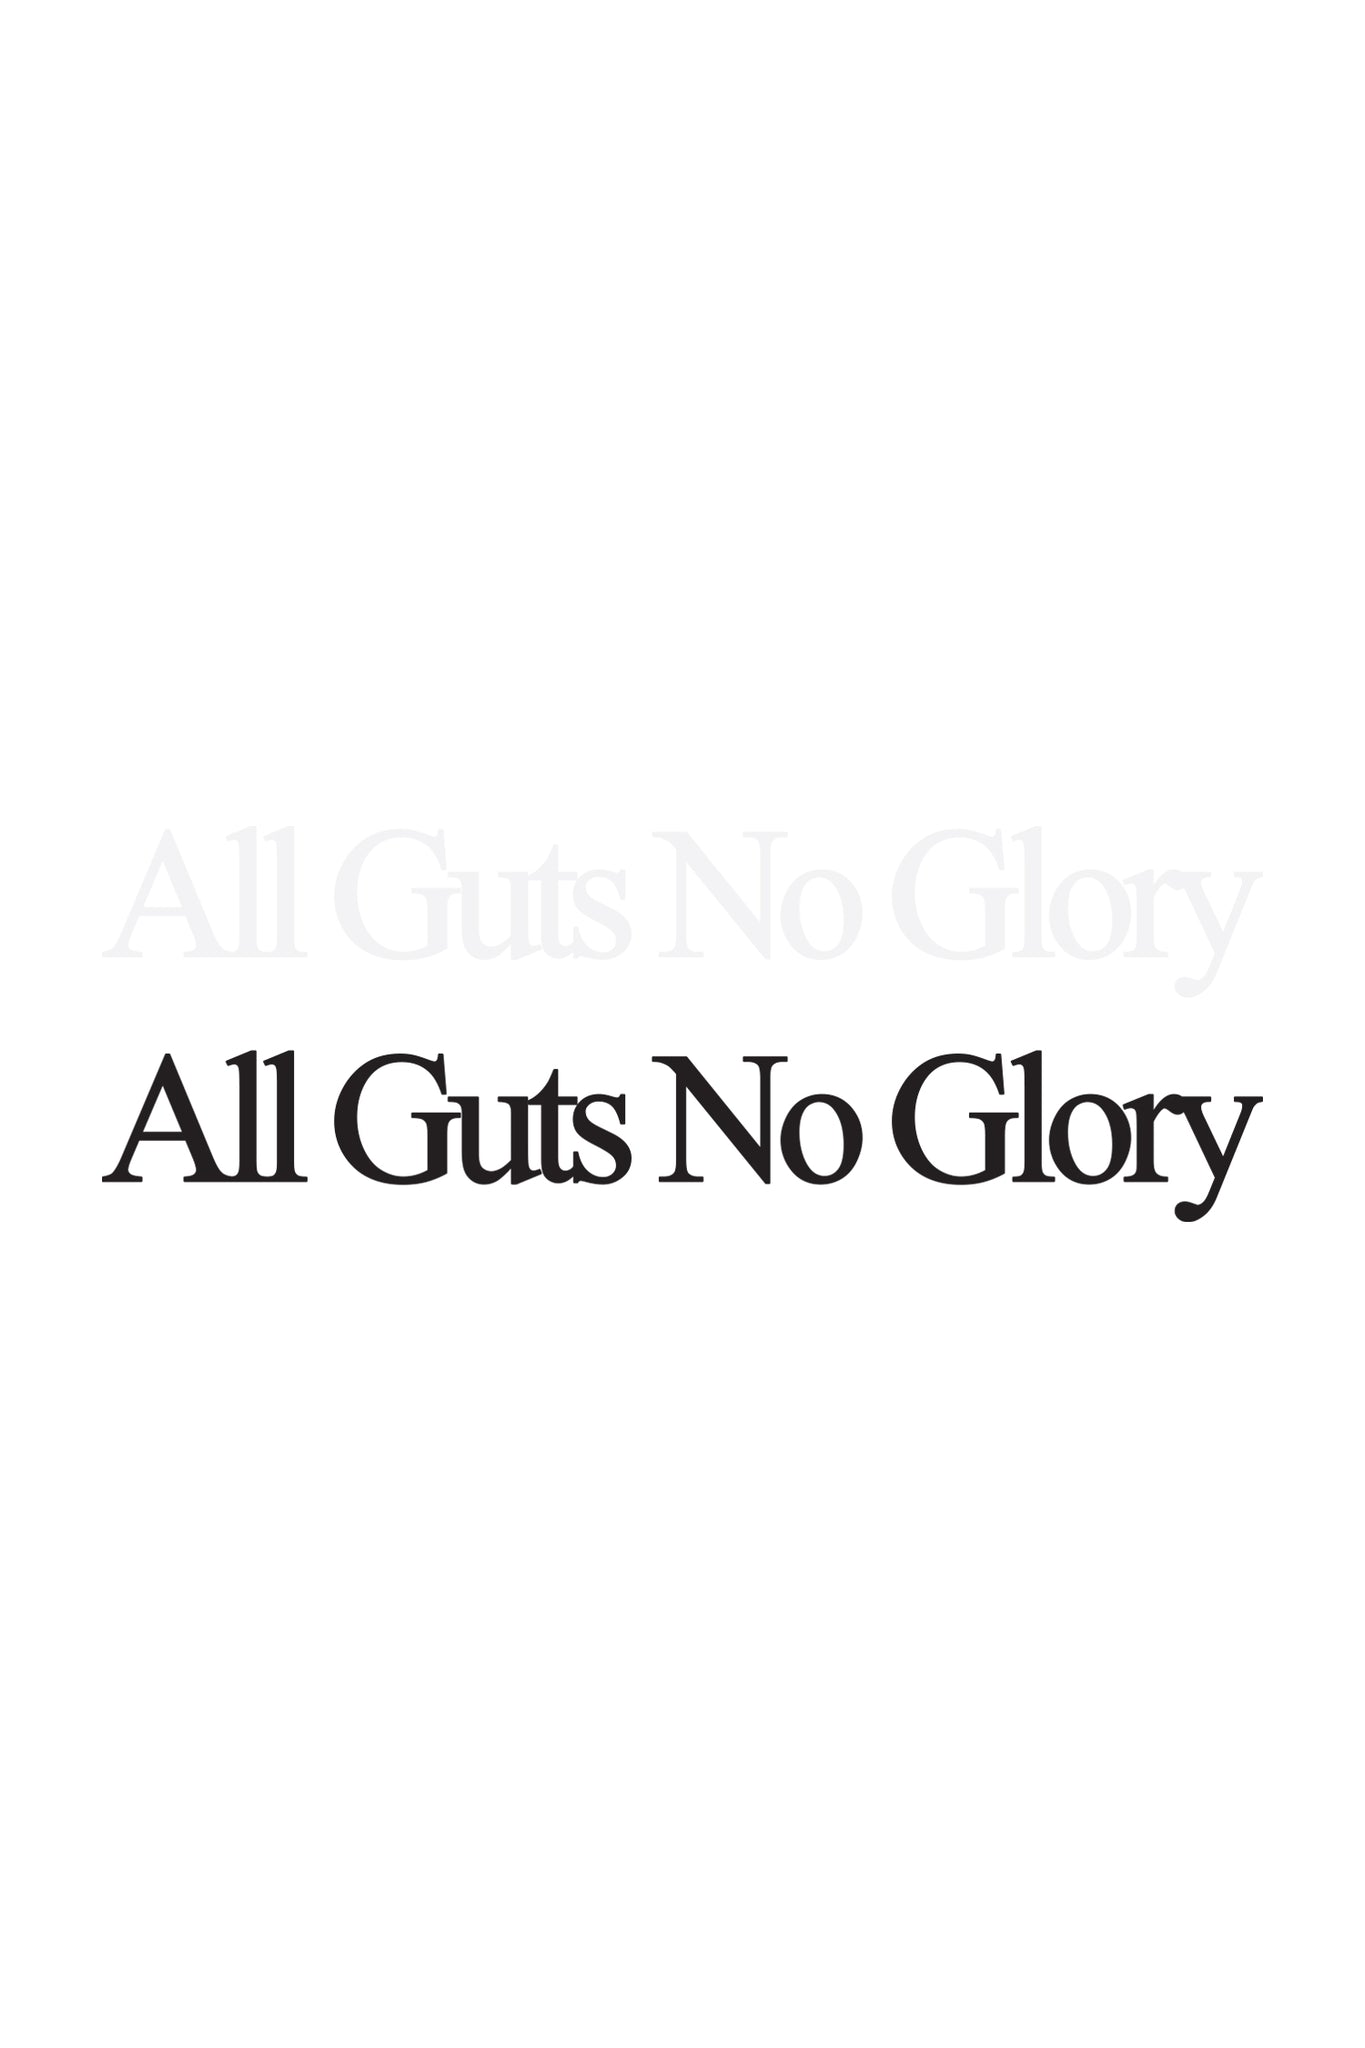 All Guts No Glory Transfer Decal